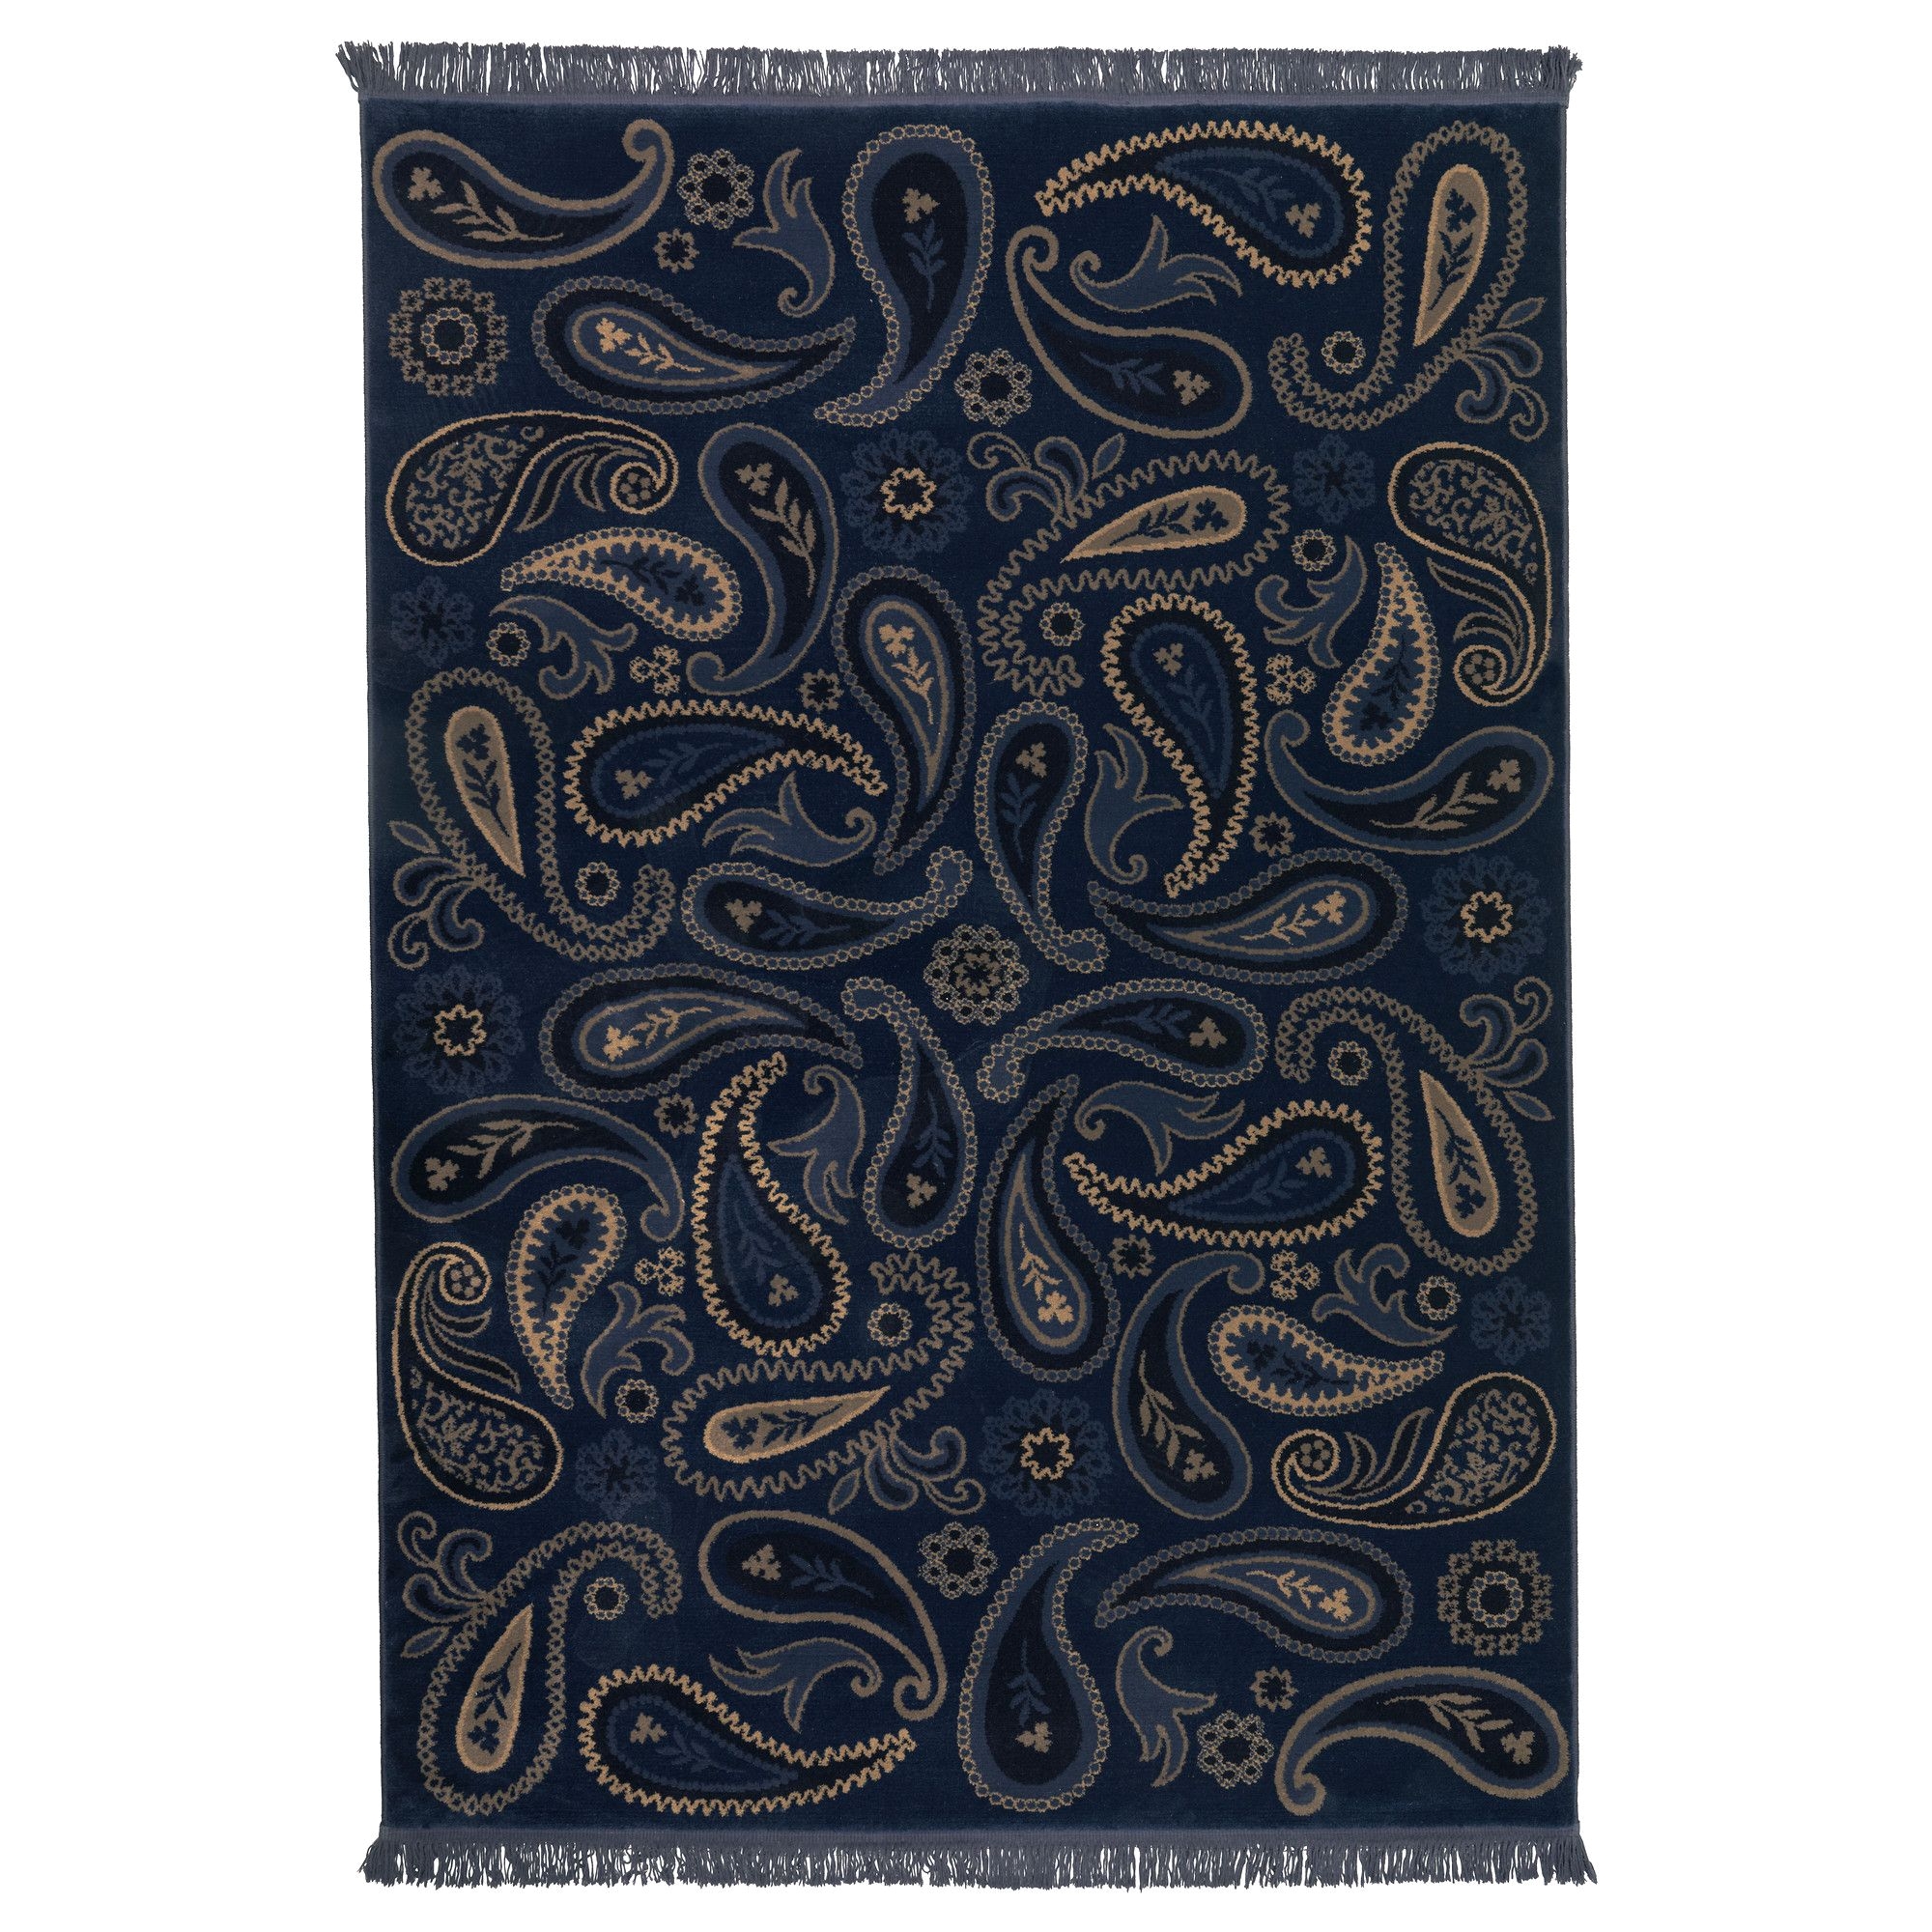 Flokati Rug Ikea Luv This Paisley but Not In Blue Vilsund Rug Low Pile Ikea